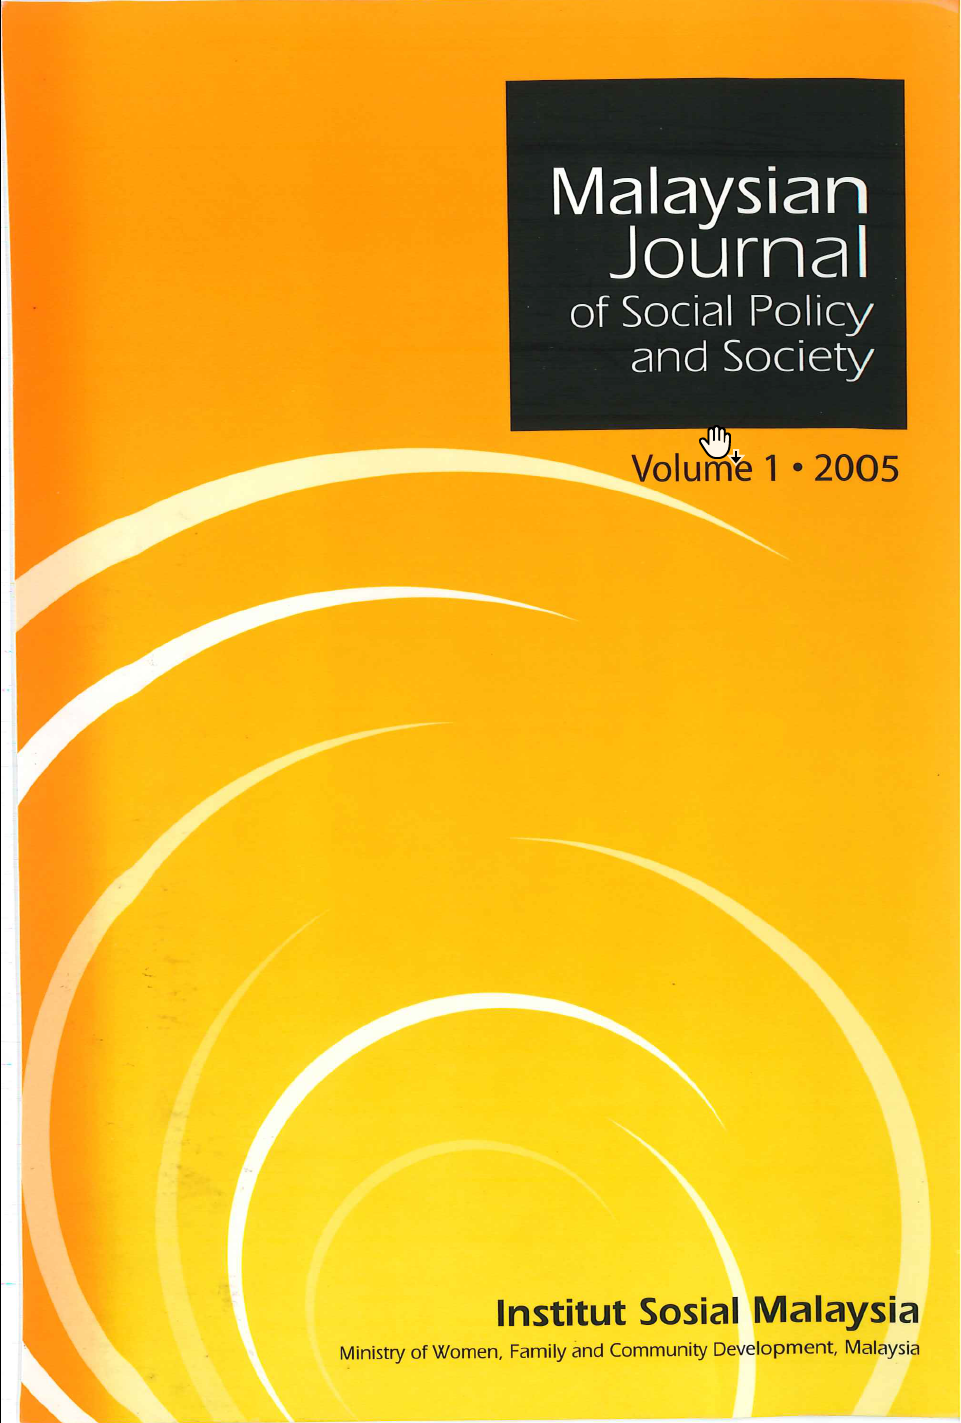 					View Vol. 1 (2005): Malaysian Journal of Social Policy and Society Volume 1 2005
				